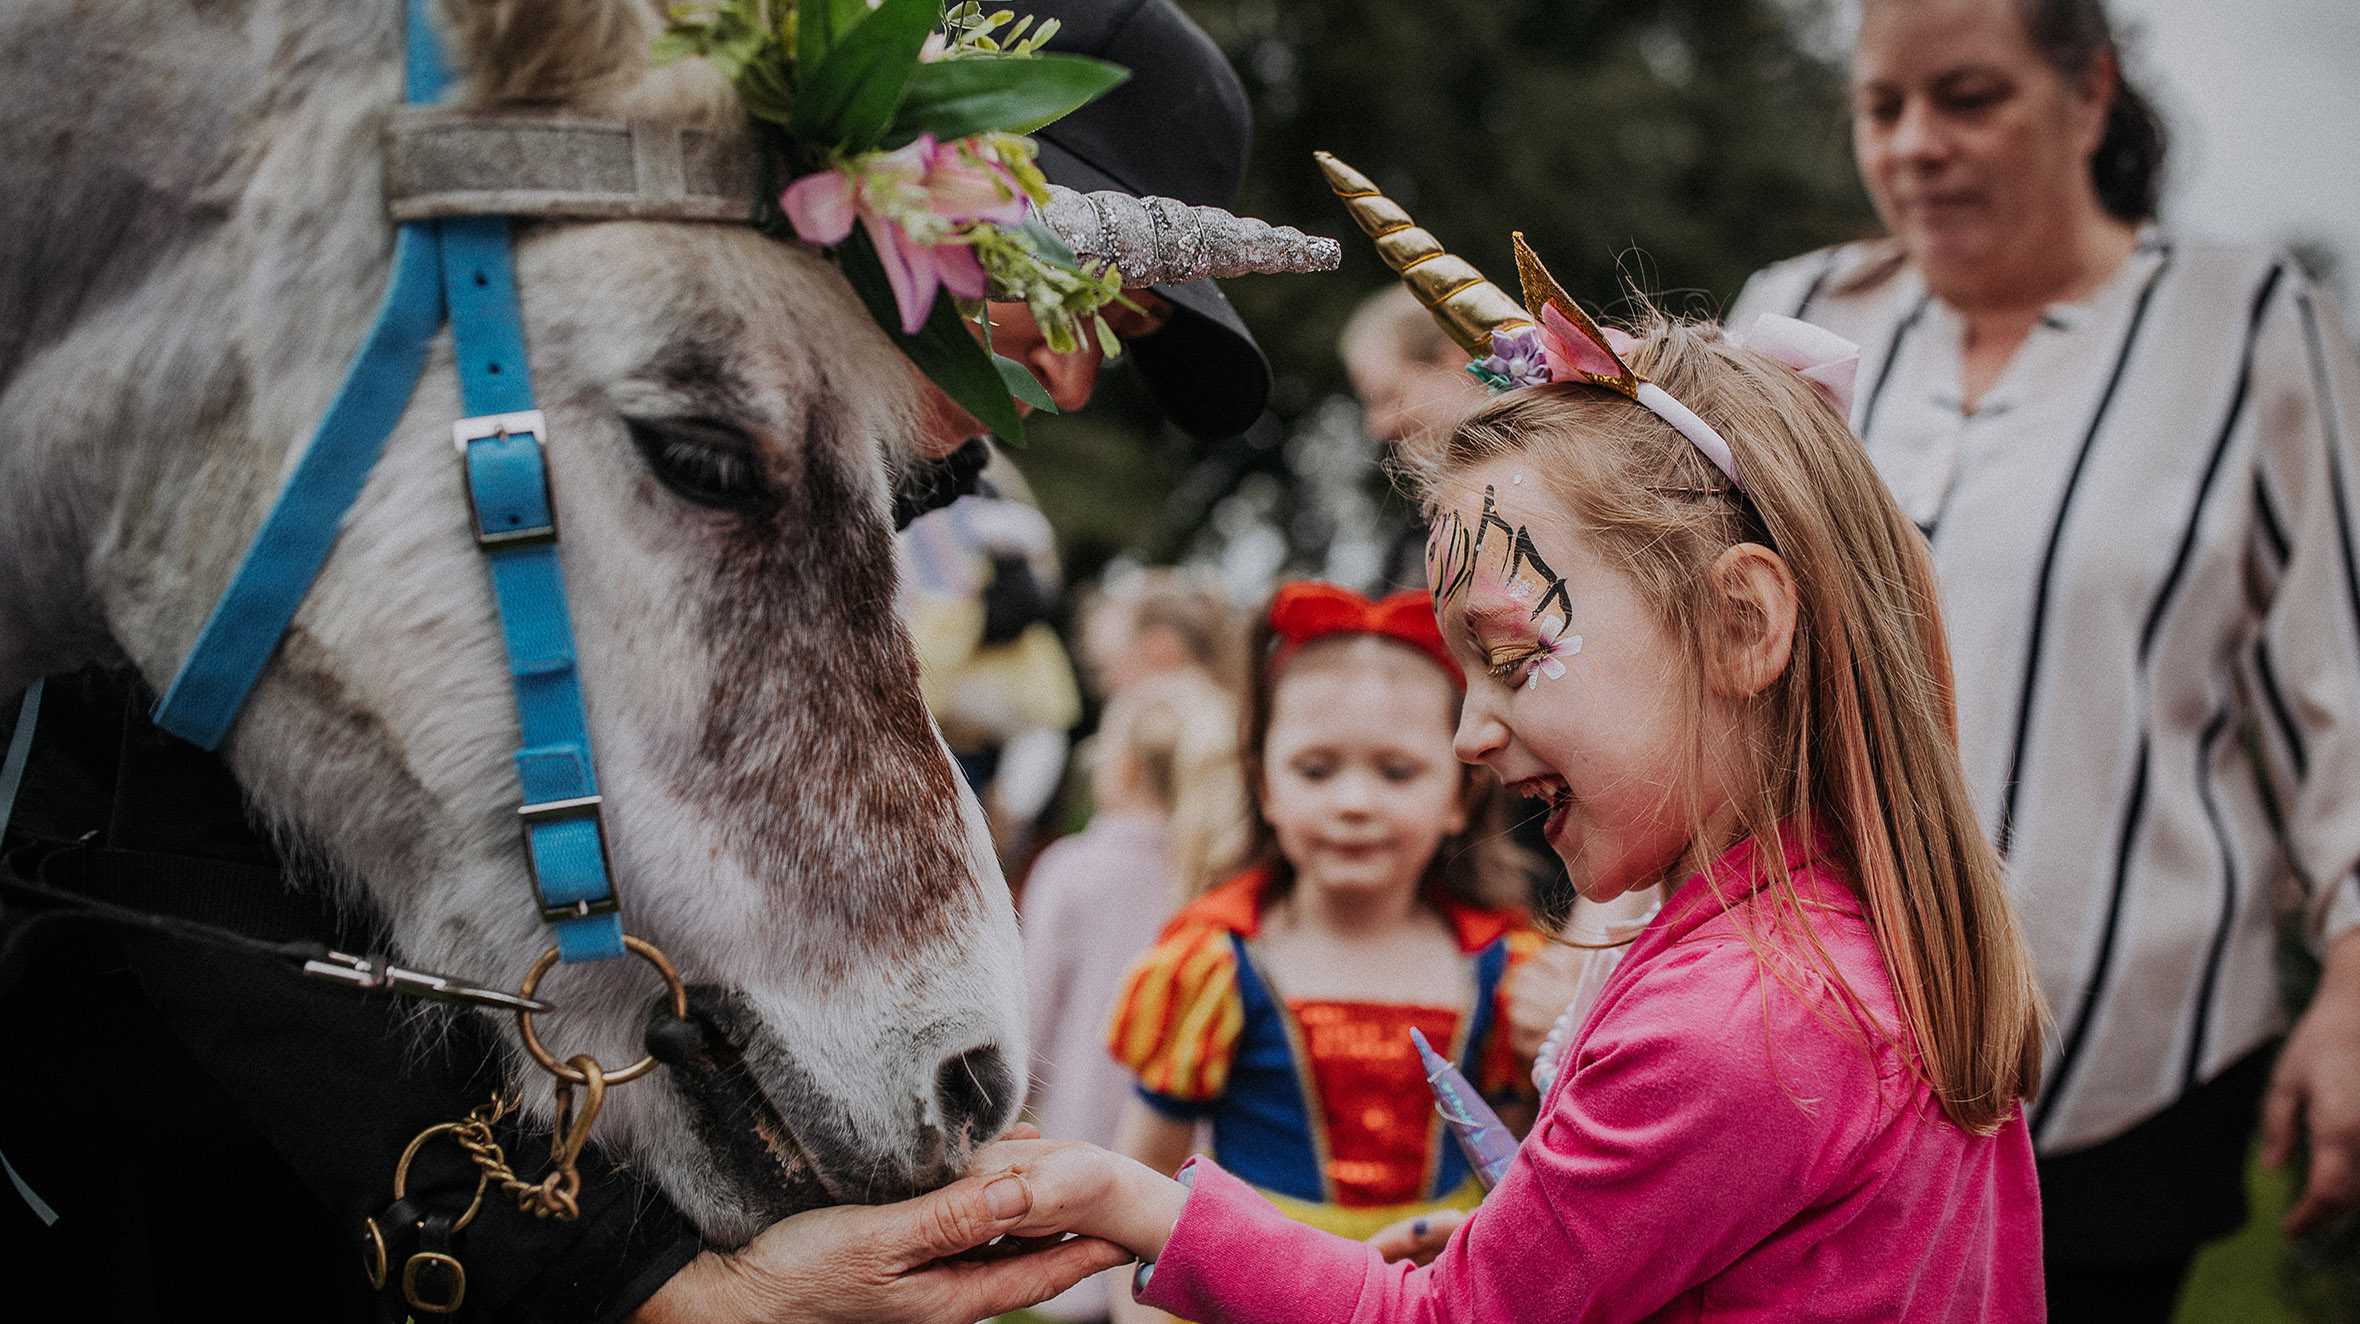 Lacey, wearing a unicorn horn and facepaint, feeds a pony wearing a unicorn horn